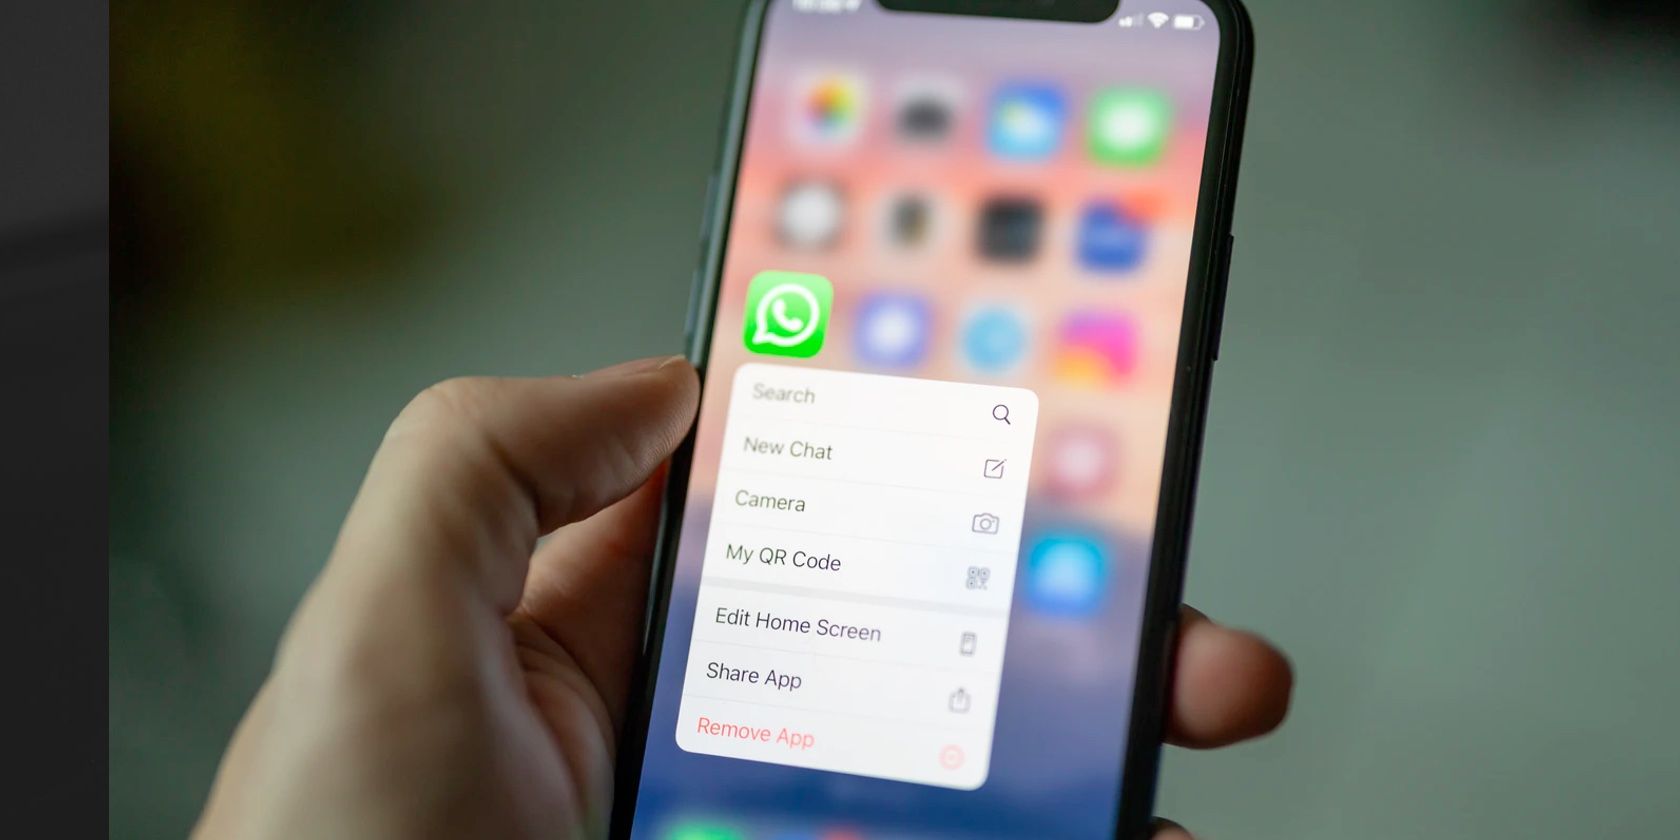 You can message people without saving their numbers on WhatsApp